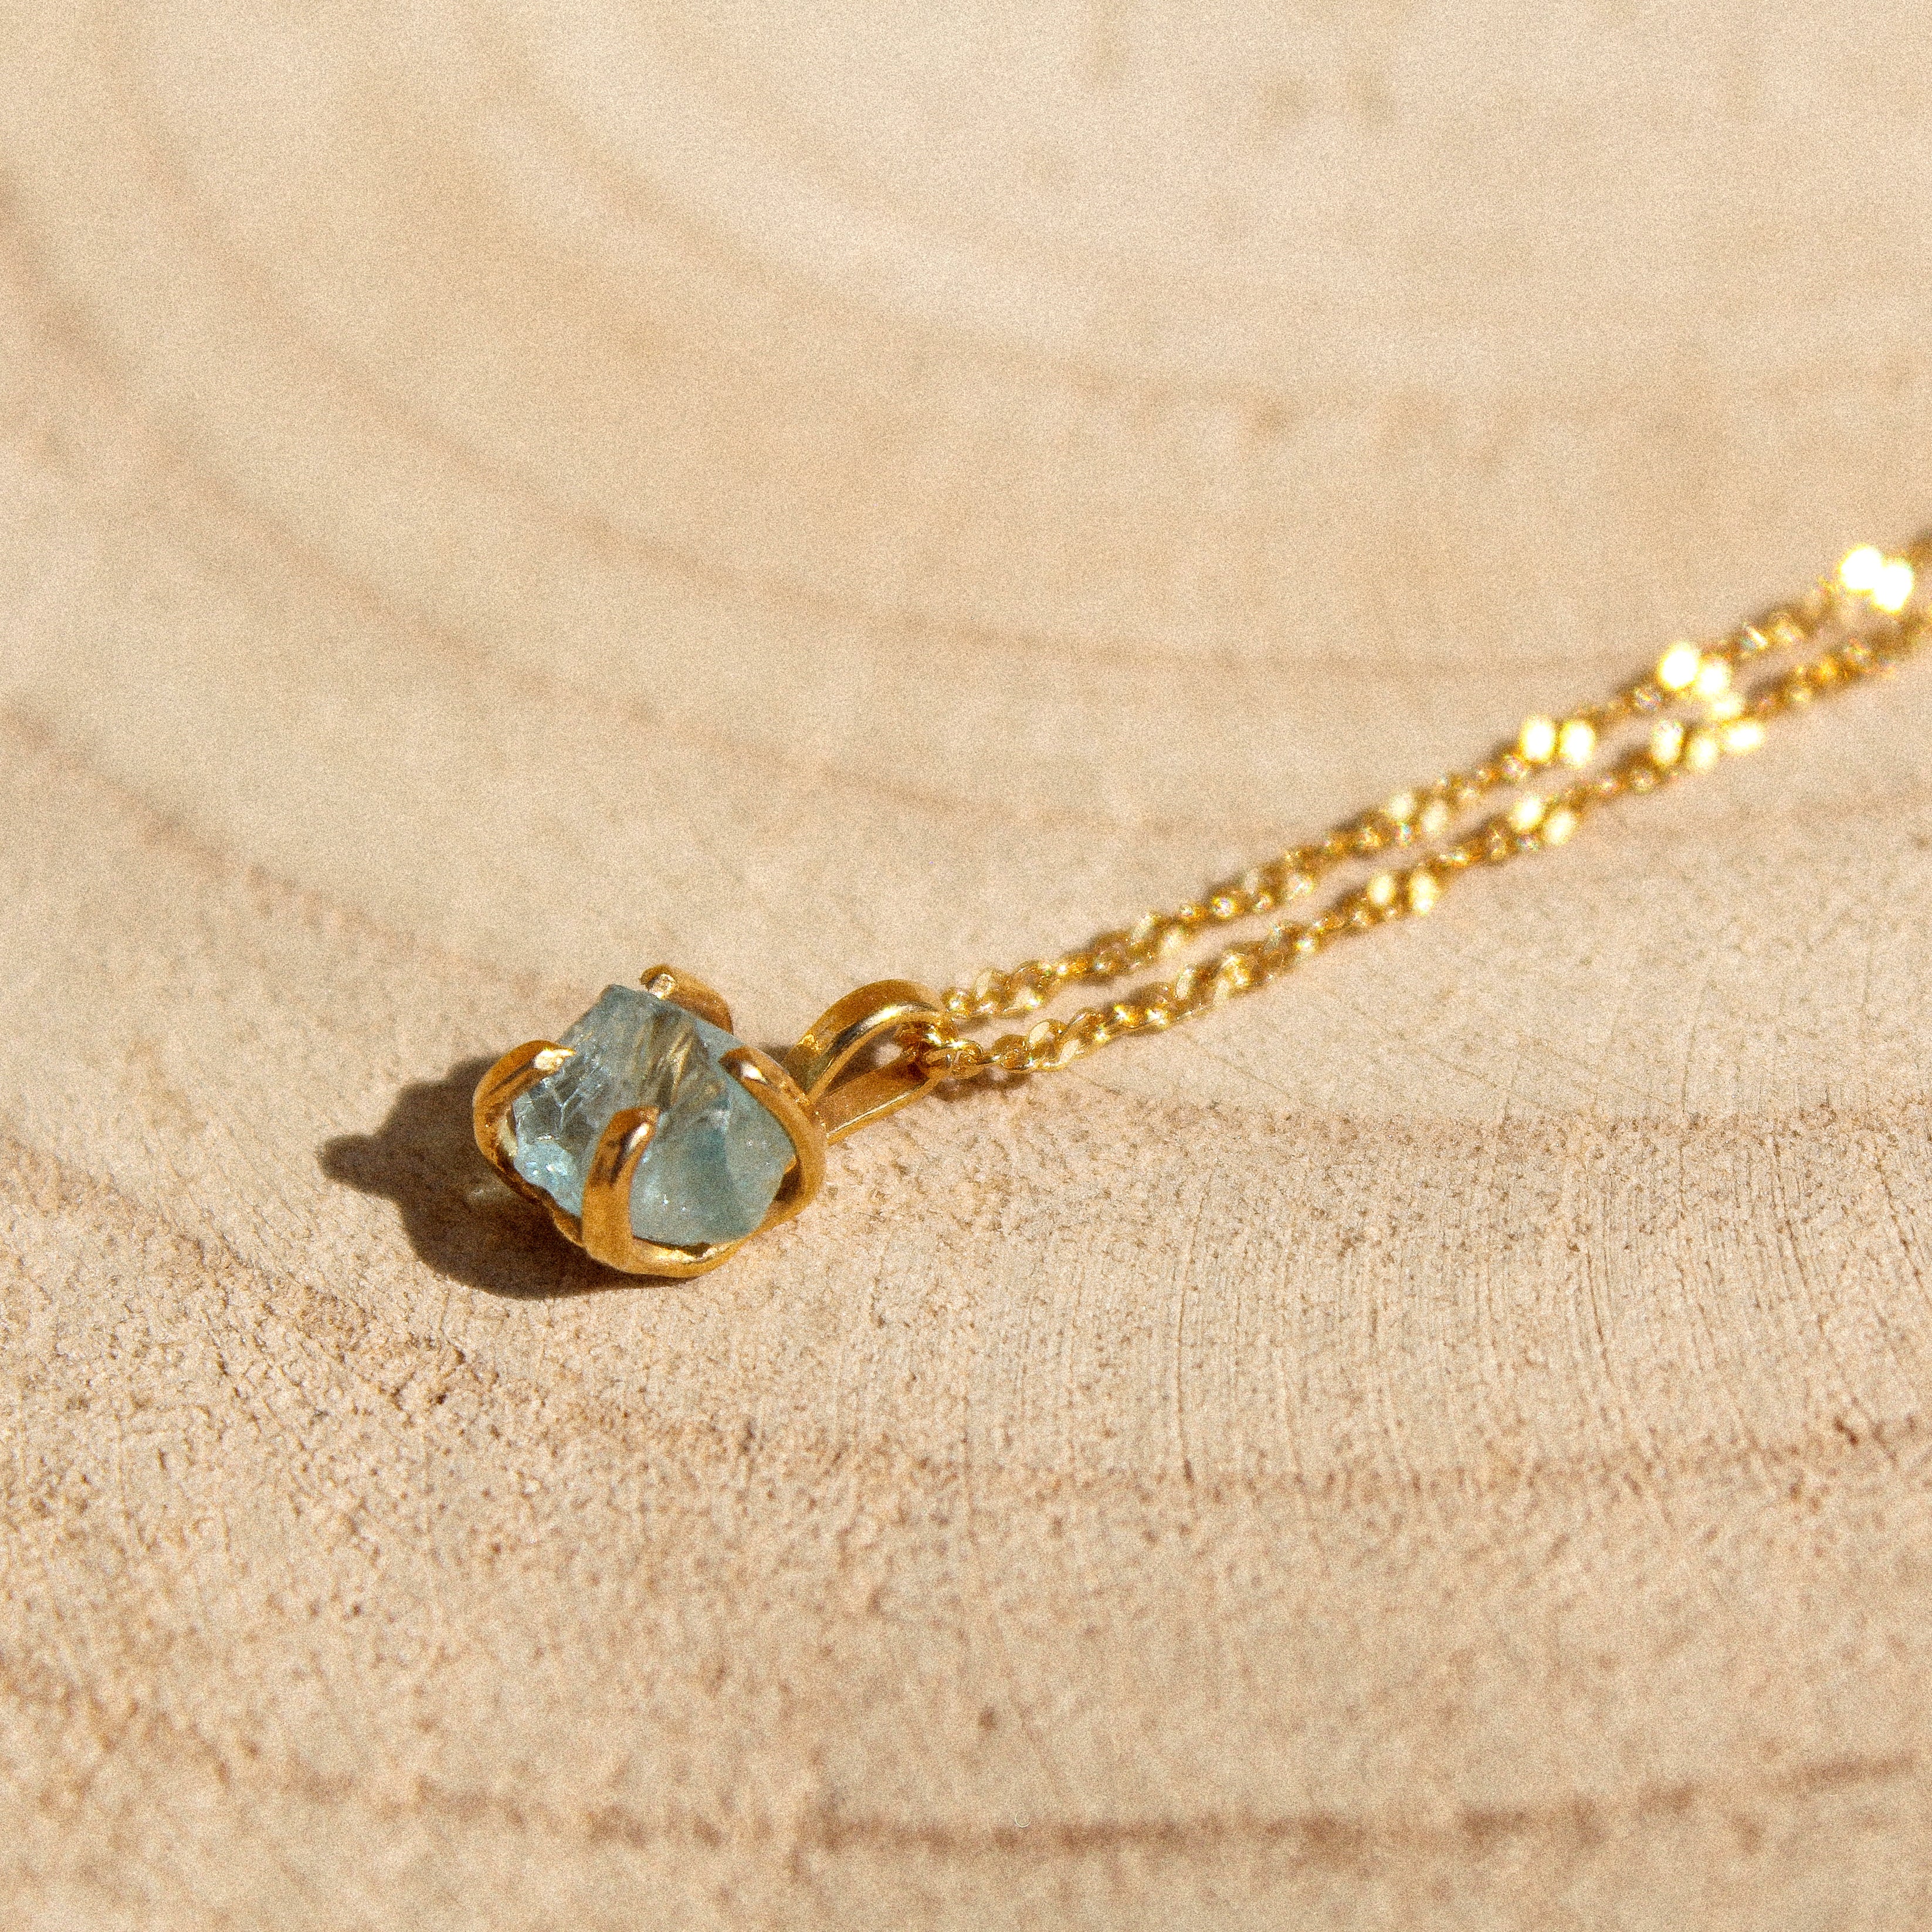 LITTLE CHARM NECKLACE - AQUAMARINE (GOLD PLATED)